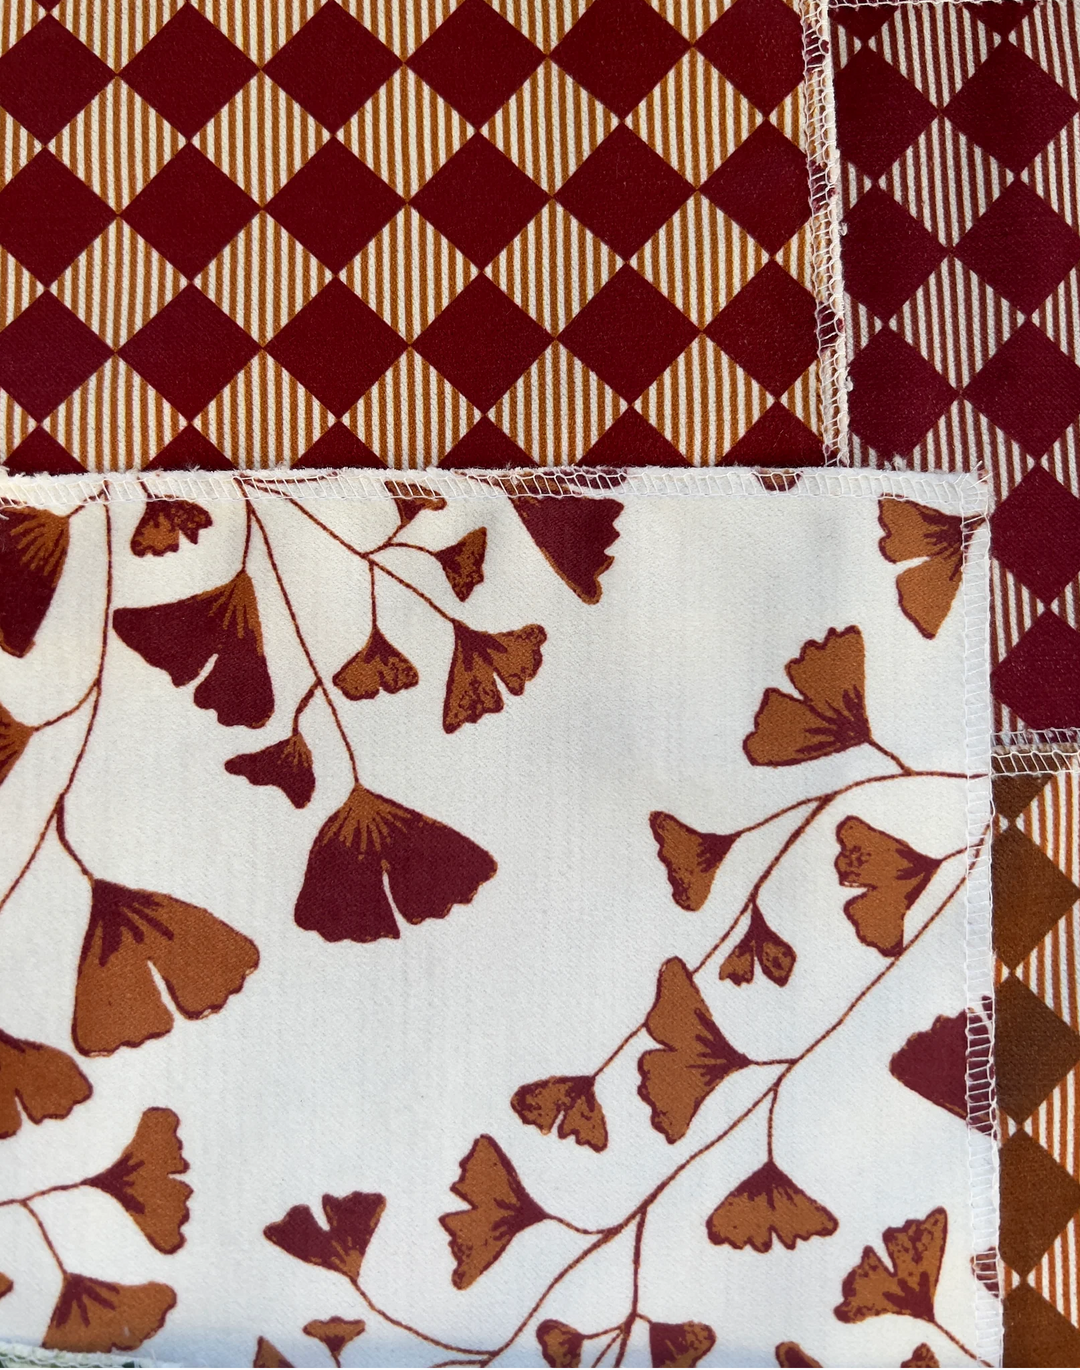 Ginkgo Leaves Fabric, Chestnut Brown